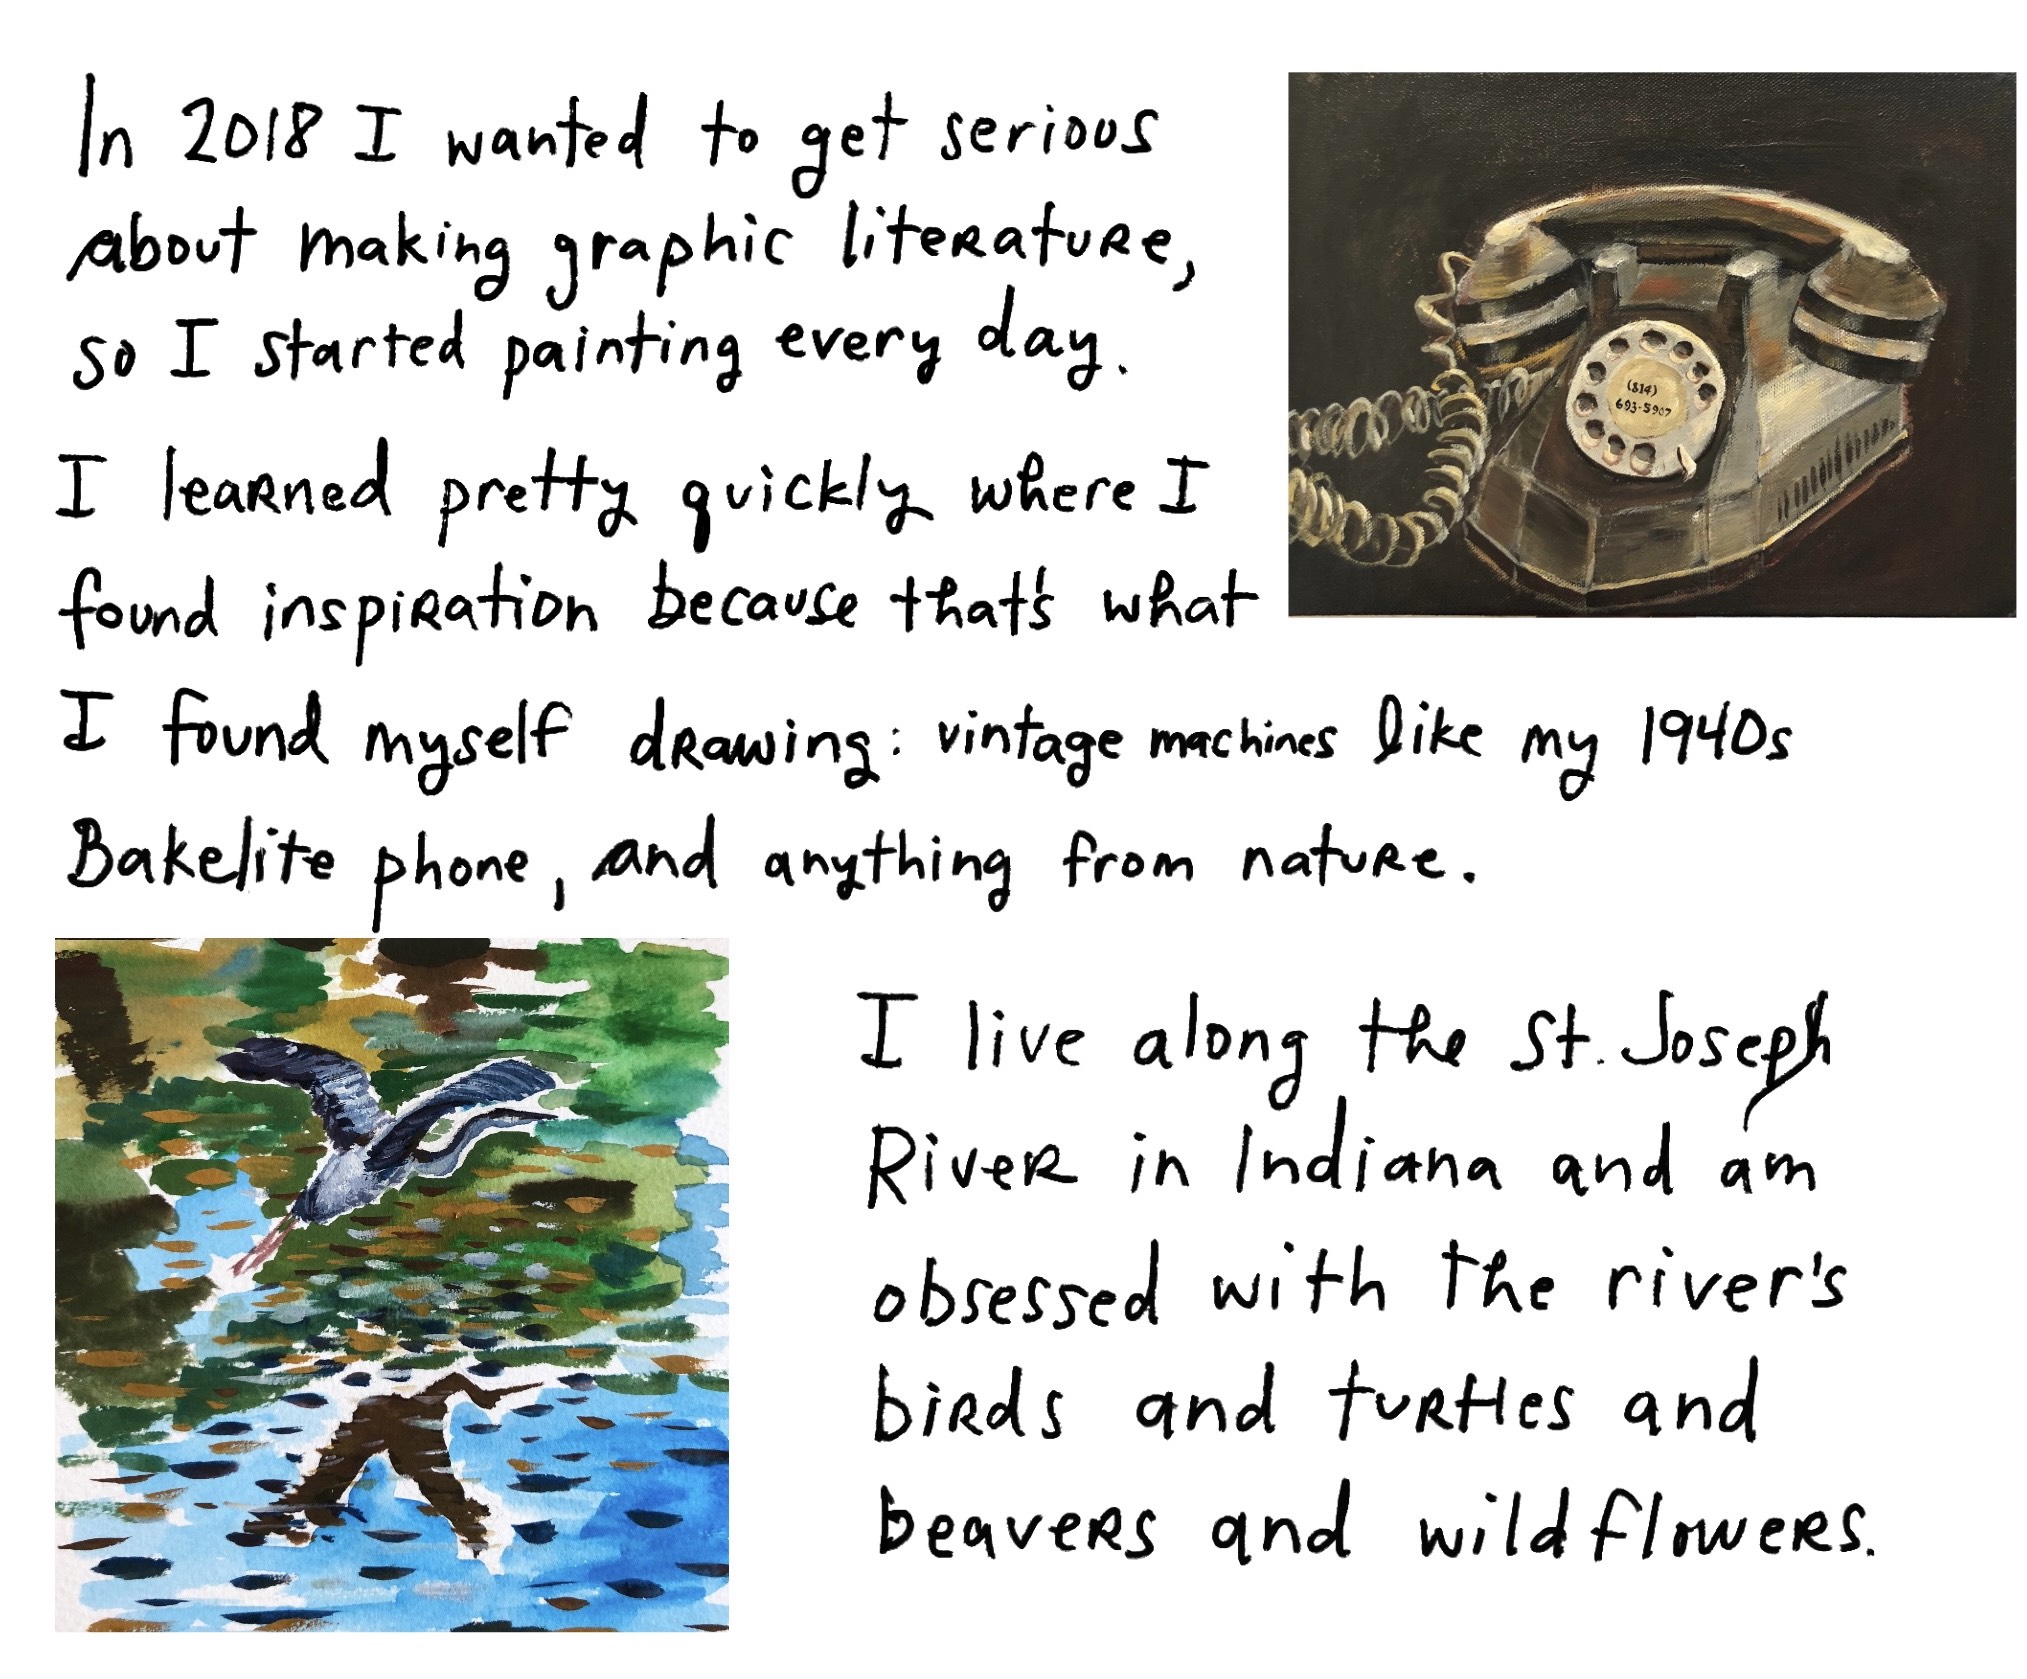 Image is a drawing of a vintage phone and birds on a river. Accompanying text: "In 2018 I wanted to get serious about making graphic literature, so I started painting every day. I learned pretty quickly where I found inspiration because that’s what I found myself drawing: vintage machines like my 1940s Bakelite phone, and anything from nature. I live along the St. Joseph River in Indiana and am obsessed with the river’s birds and turtles and beavers and wildflowers."